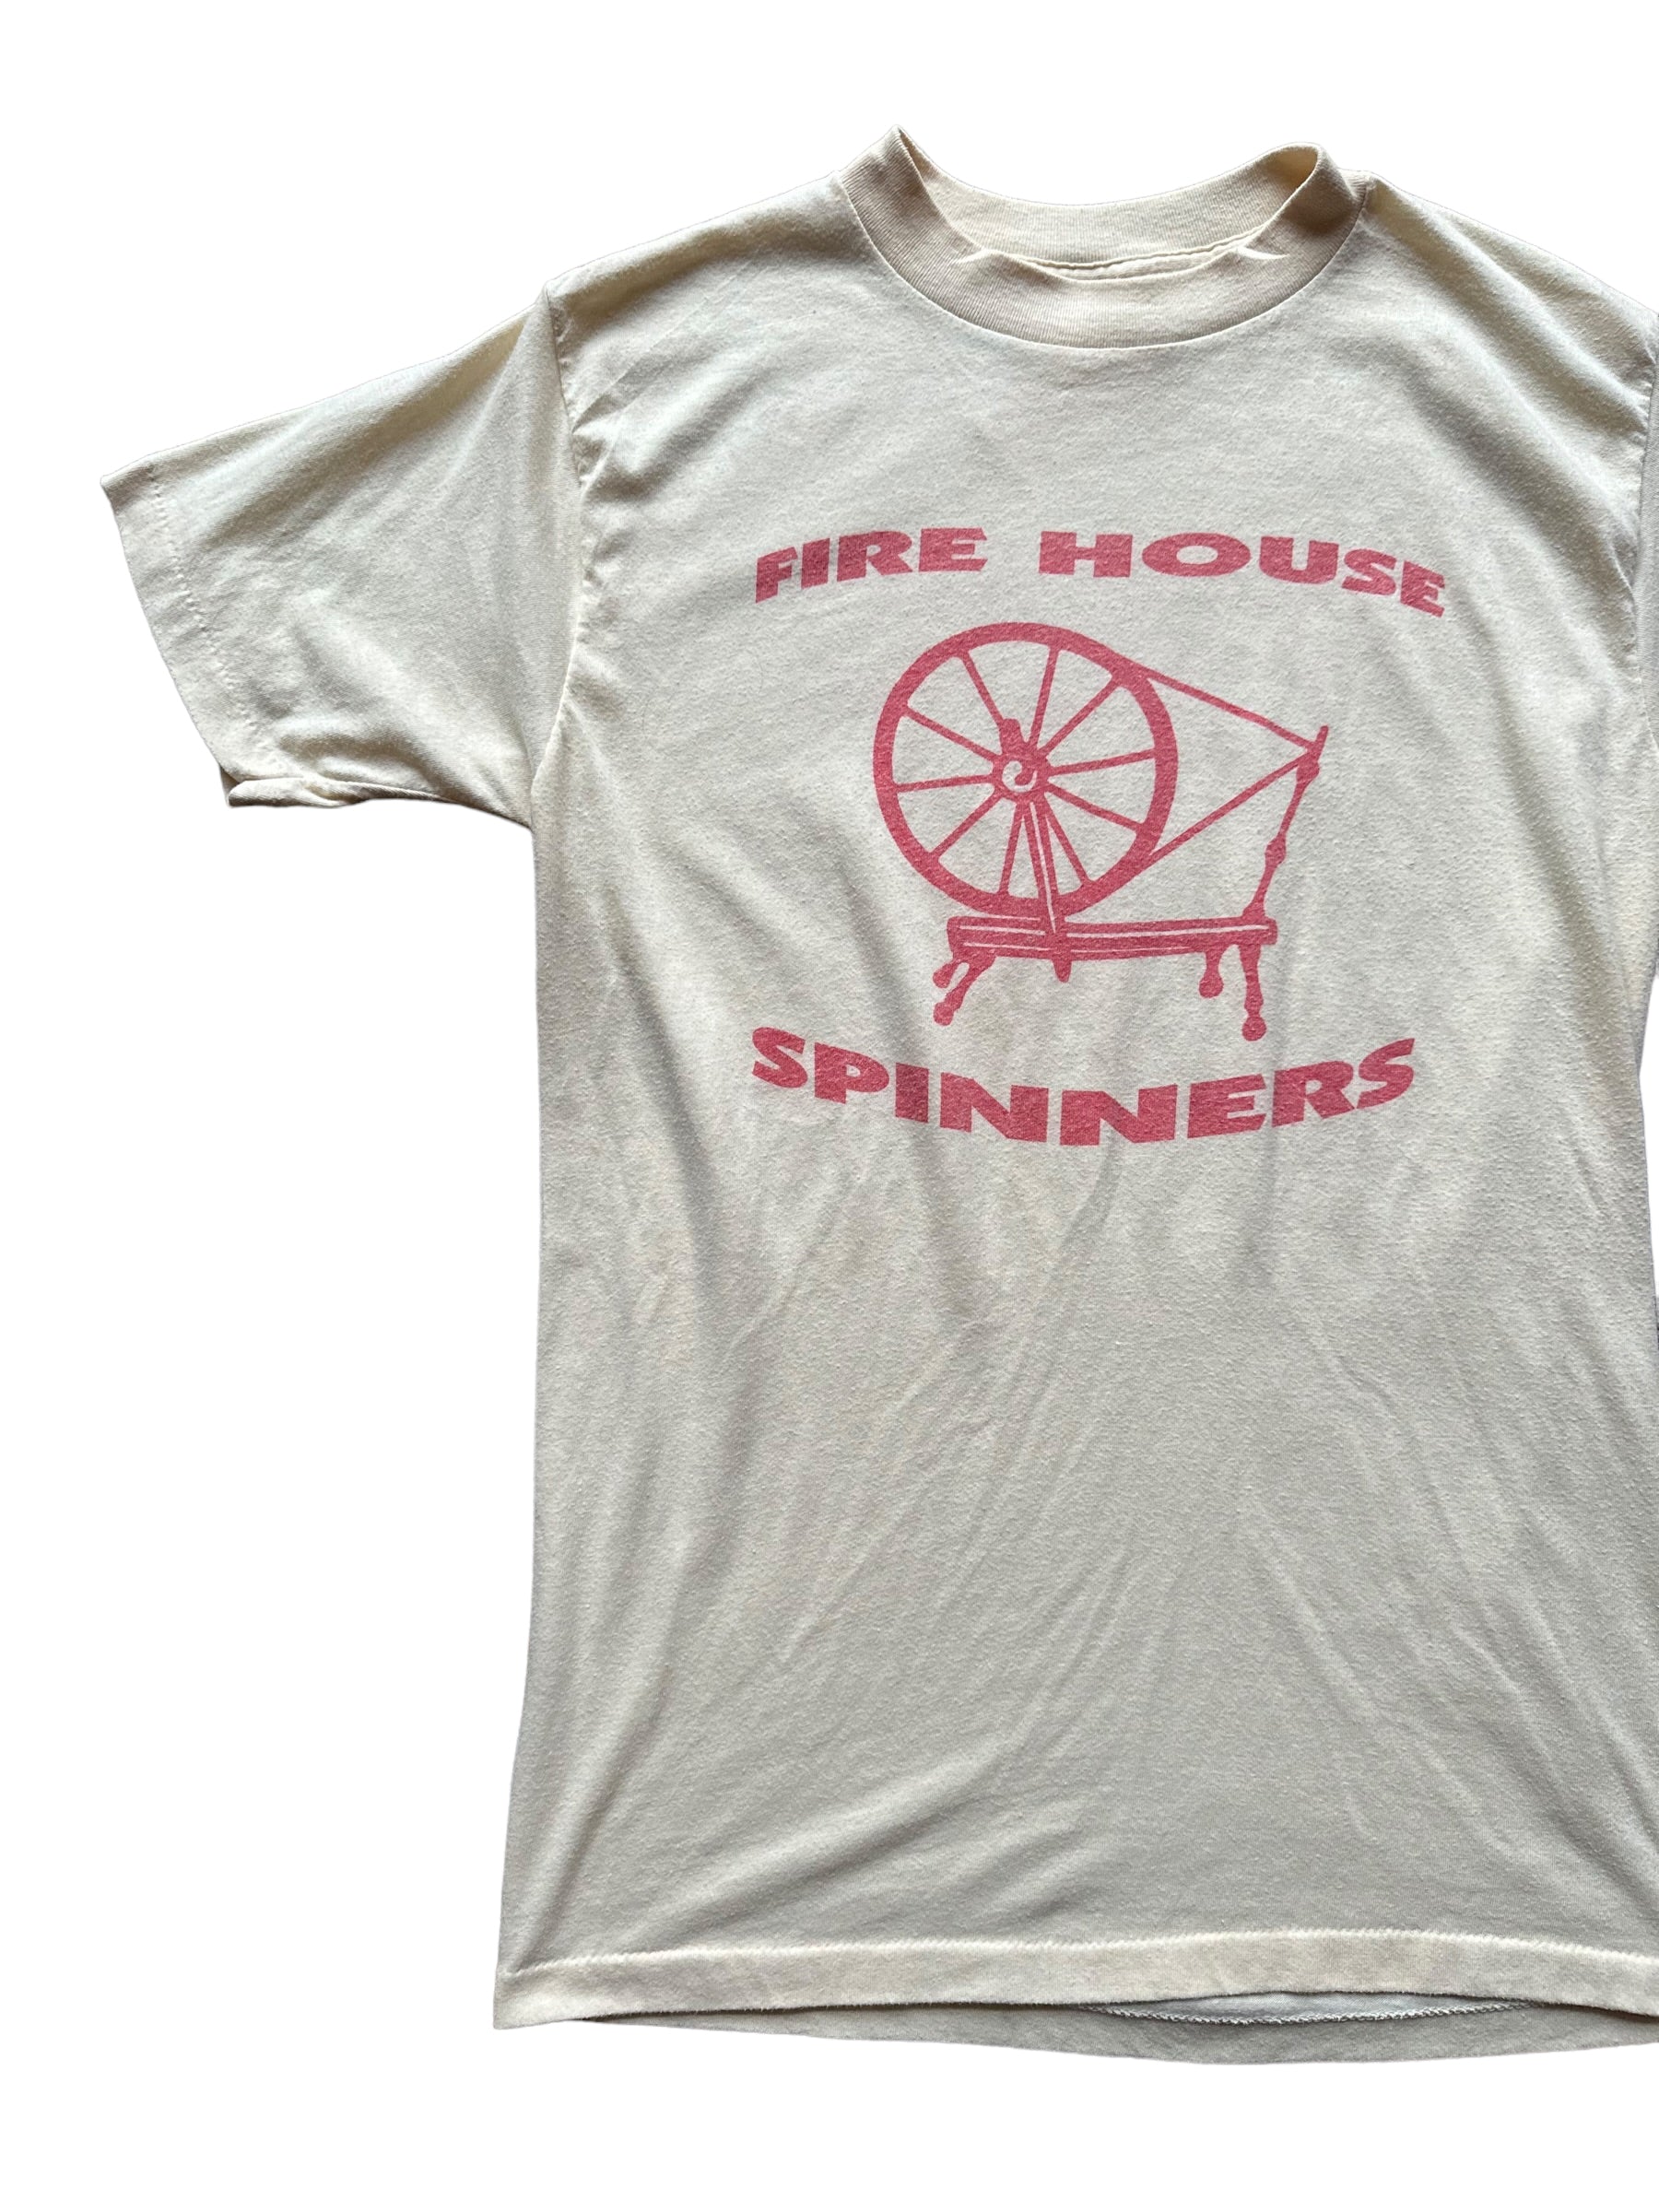 Front Right Side Detail on Vintage Fire House Spinners Tee Size Large|  Vintage T Shirt Seattle | Barn Owl Vintage Tee